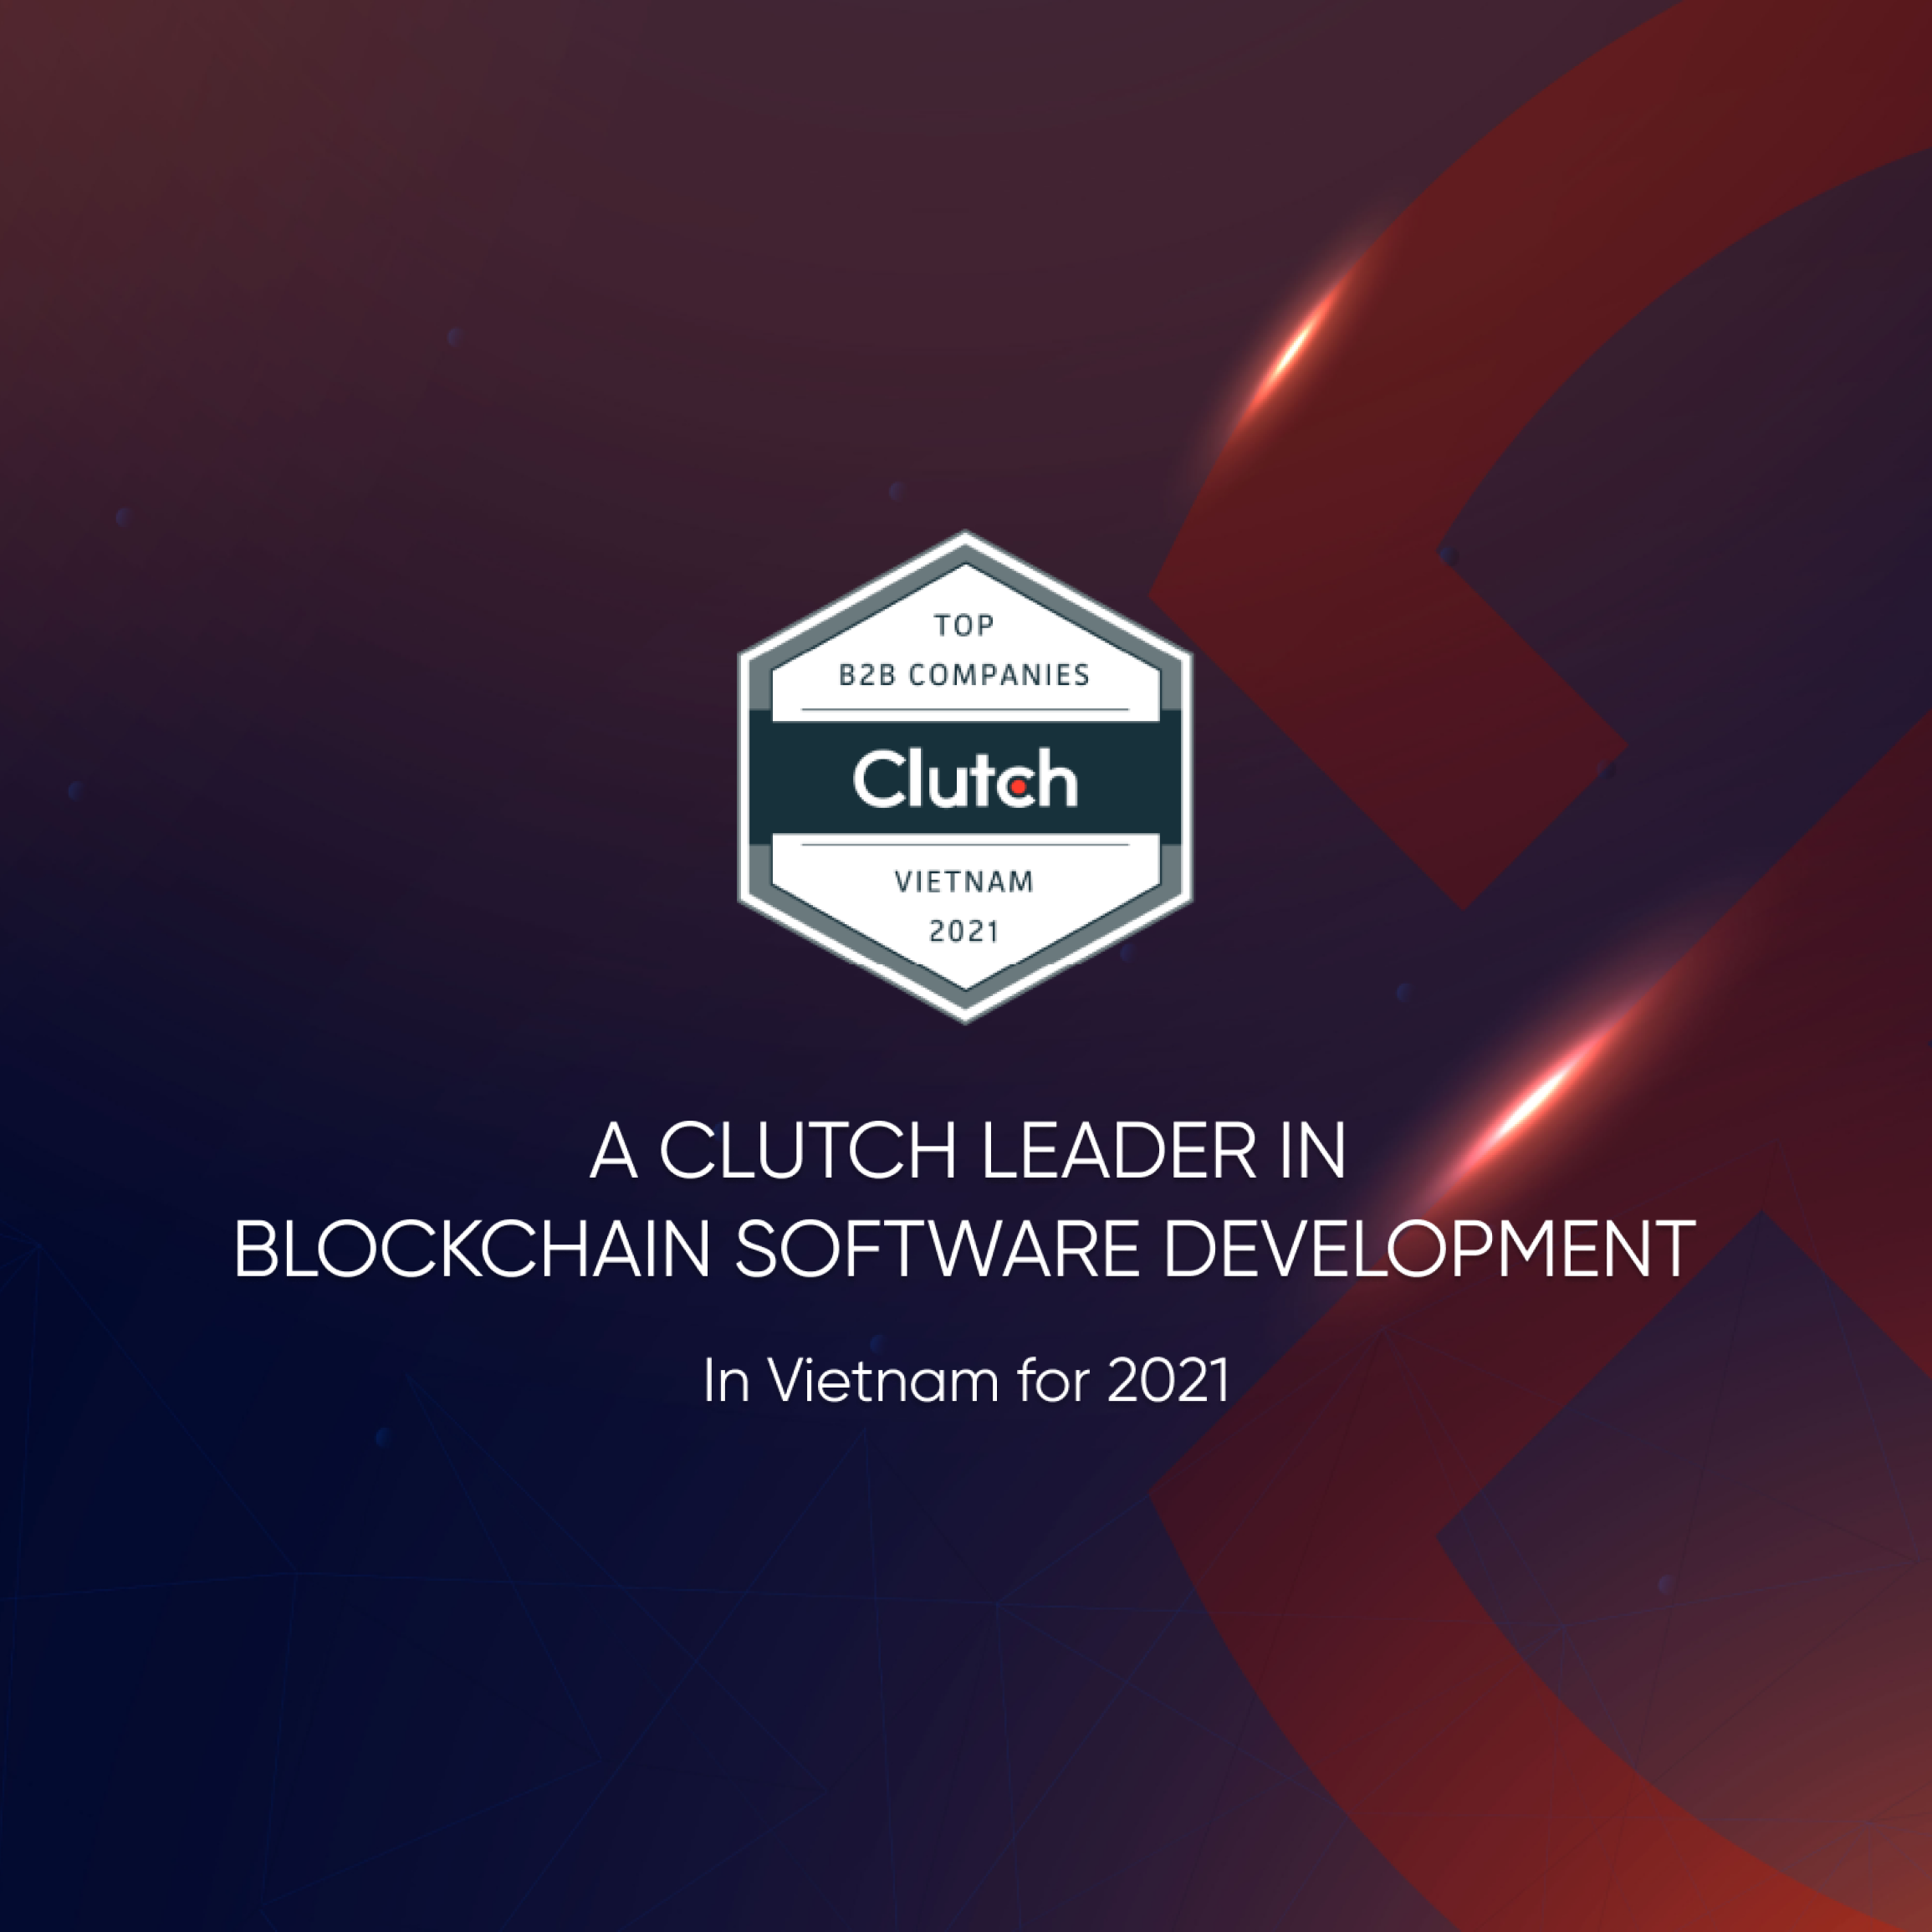 Clutch recognized Ekoios among most highly recommended B2B service providers in Vietnam